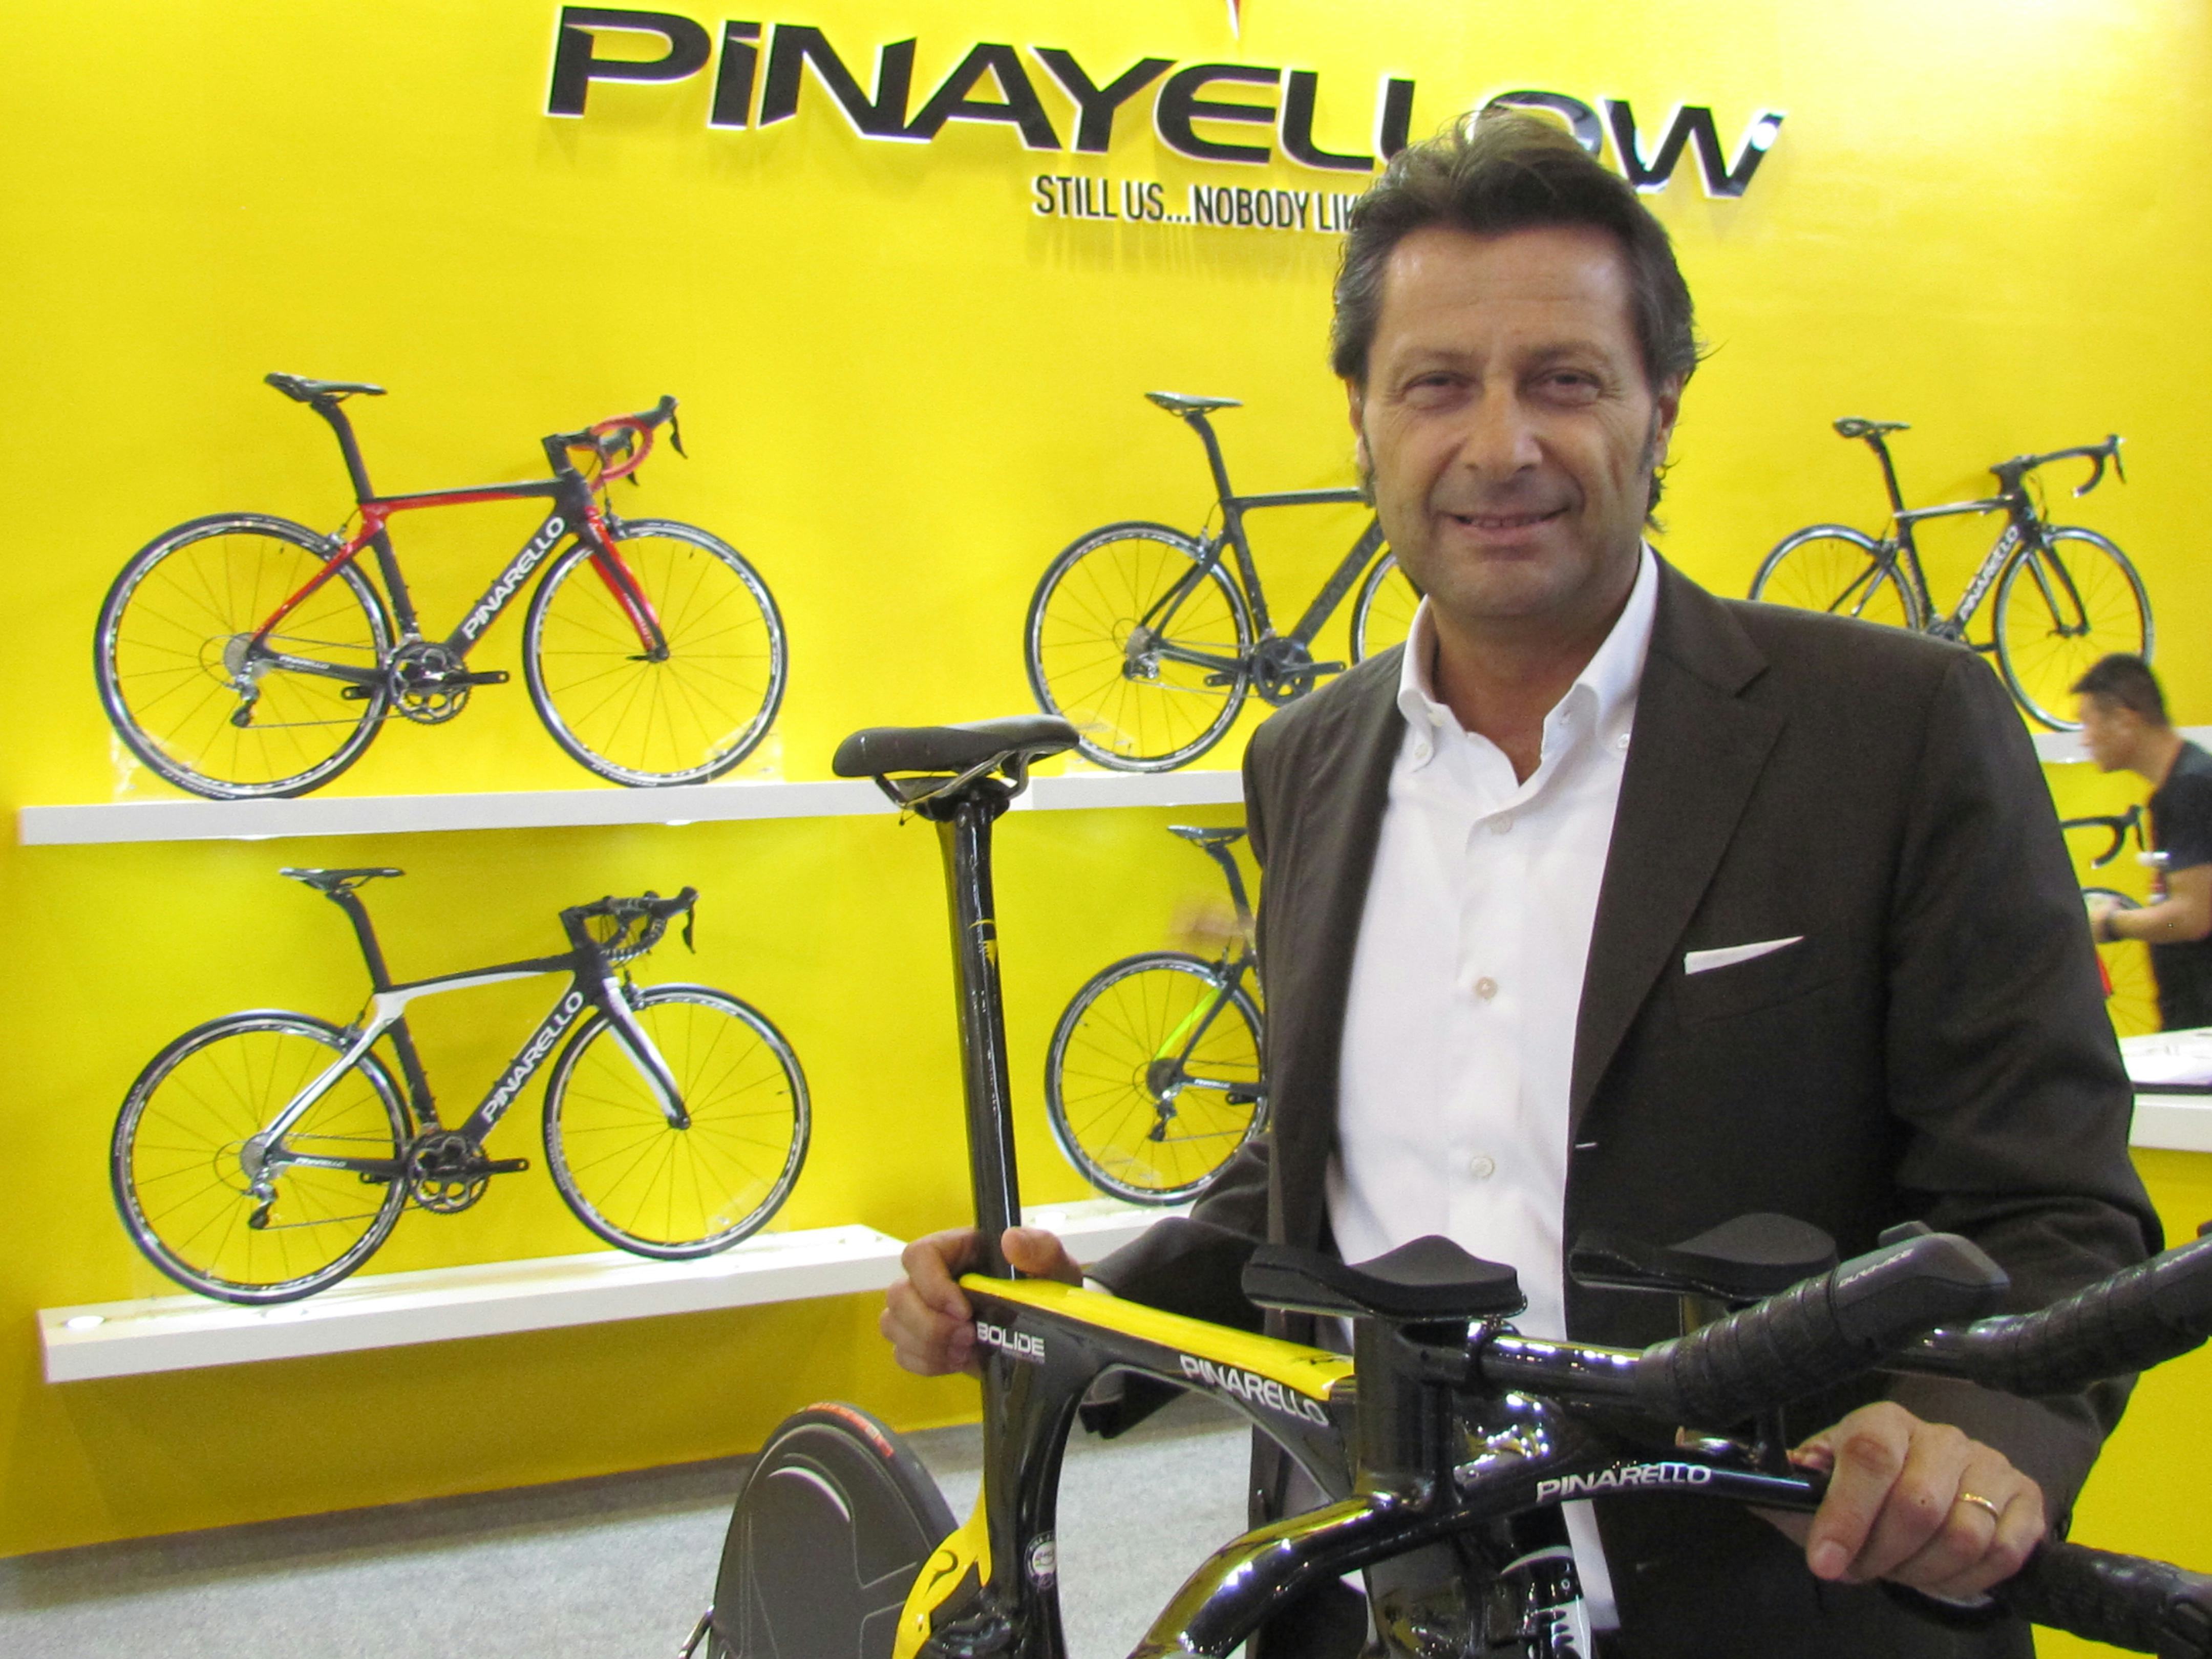 “With even more passion than before, we will write a new page of the company story,” said CEO Fausto Pinarello. – Photo Bike Europe